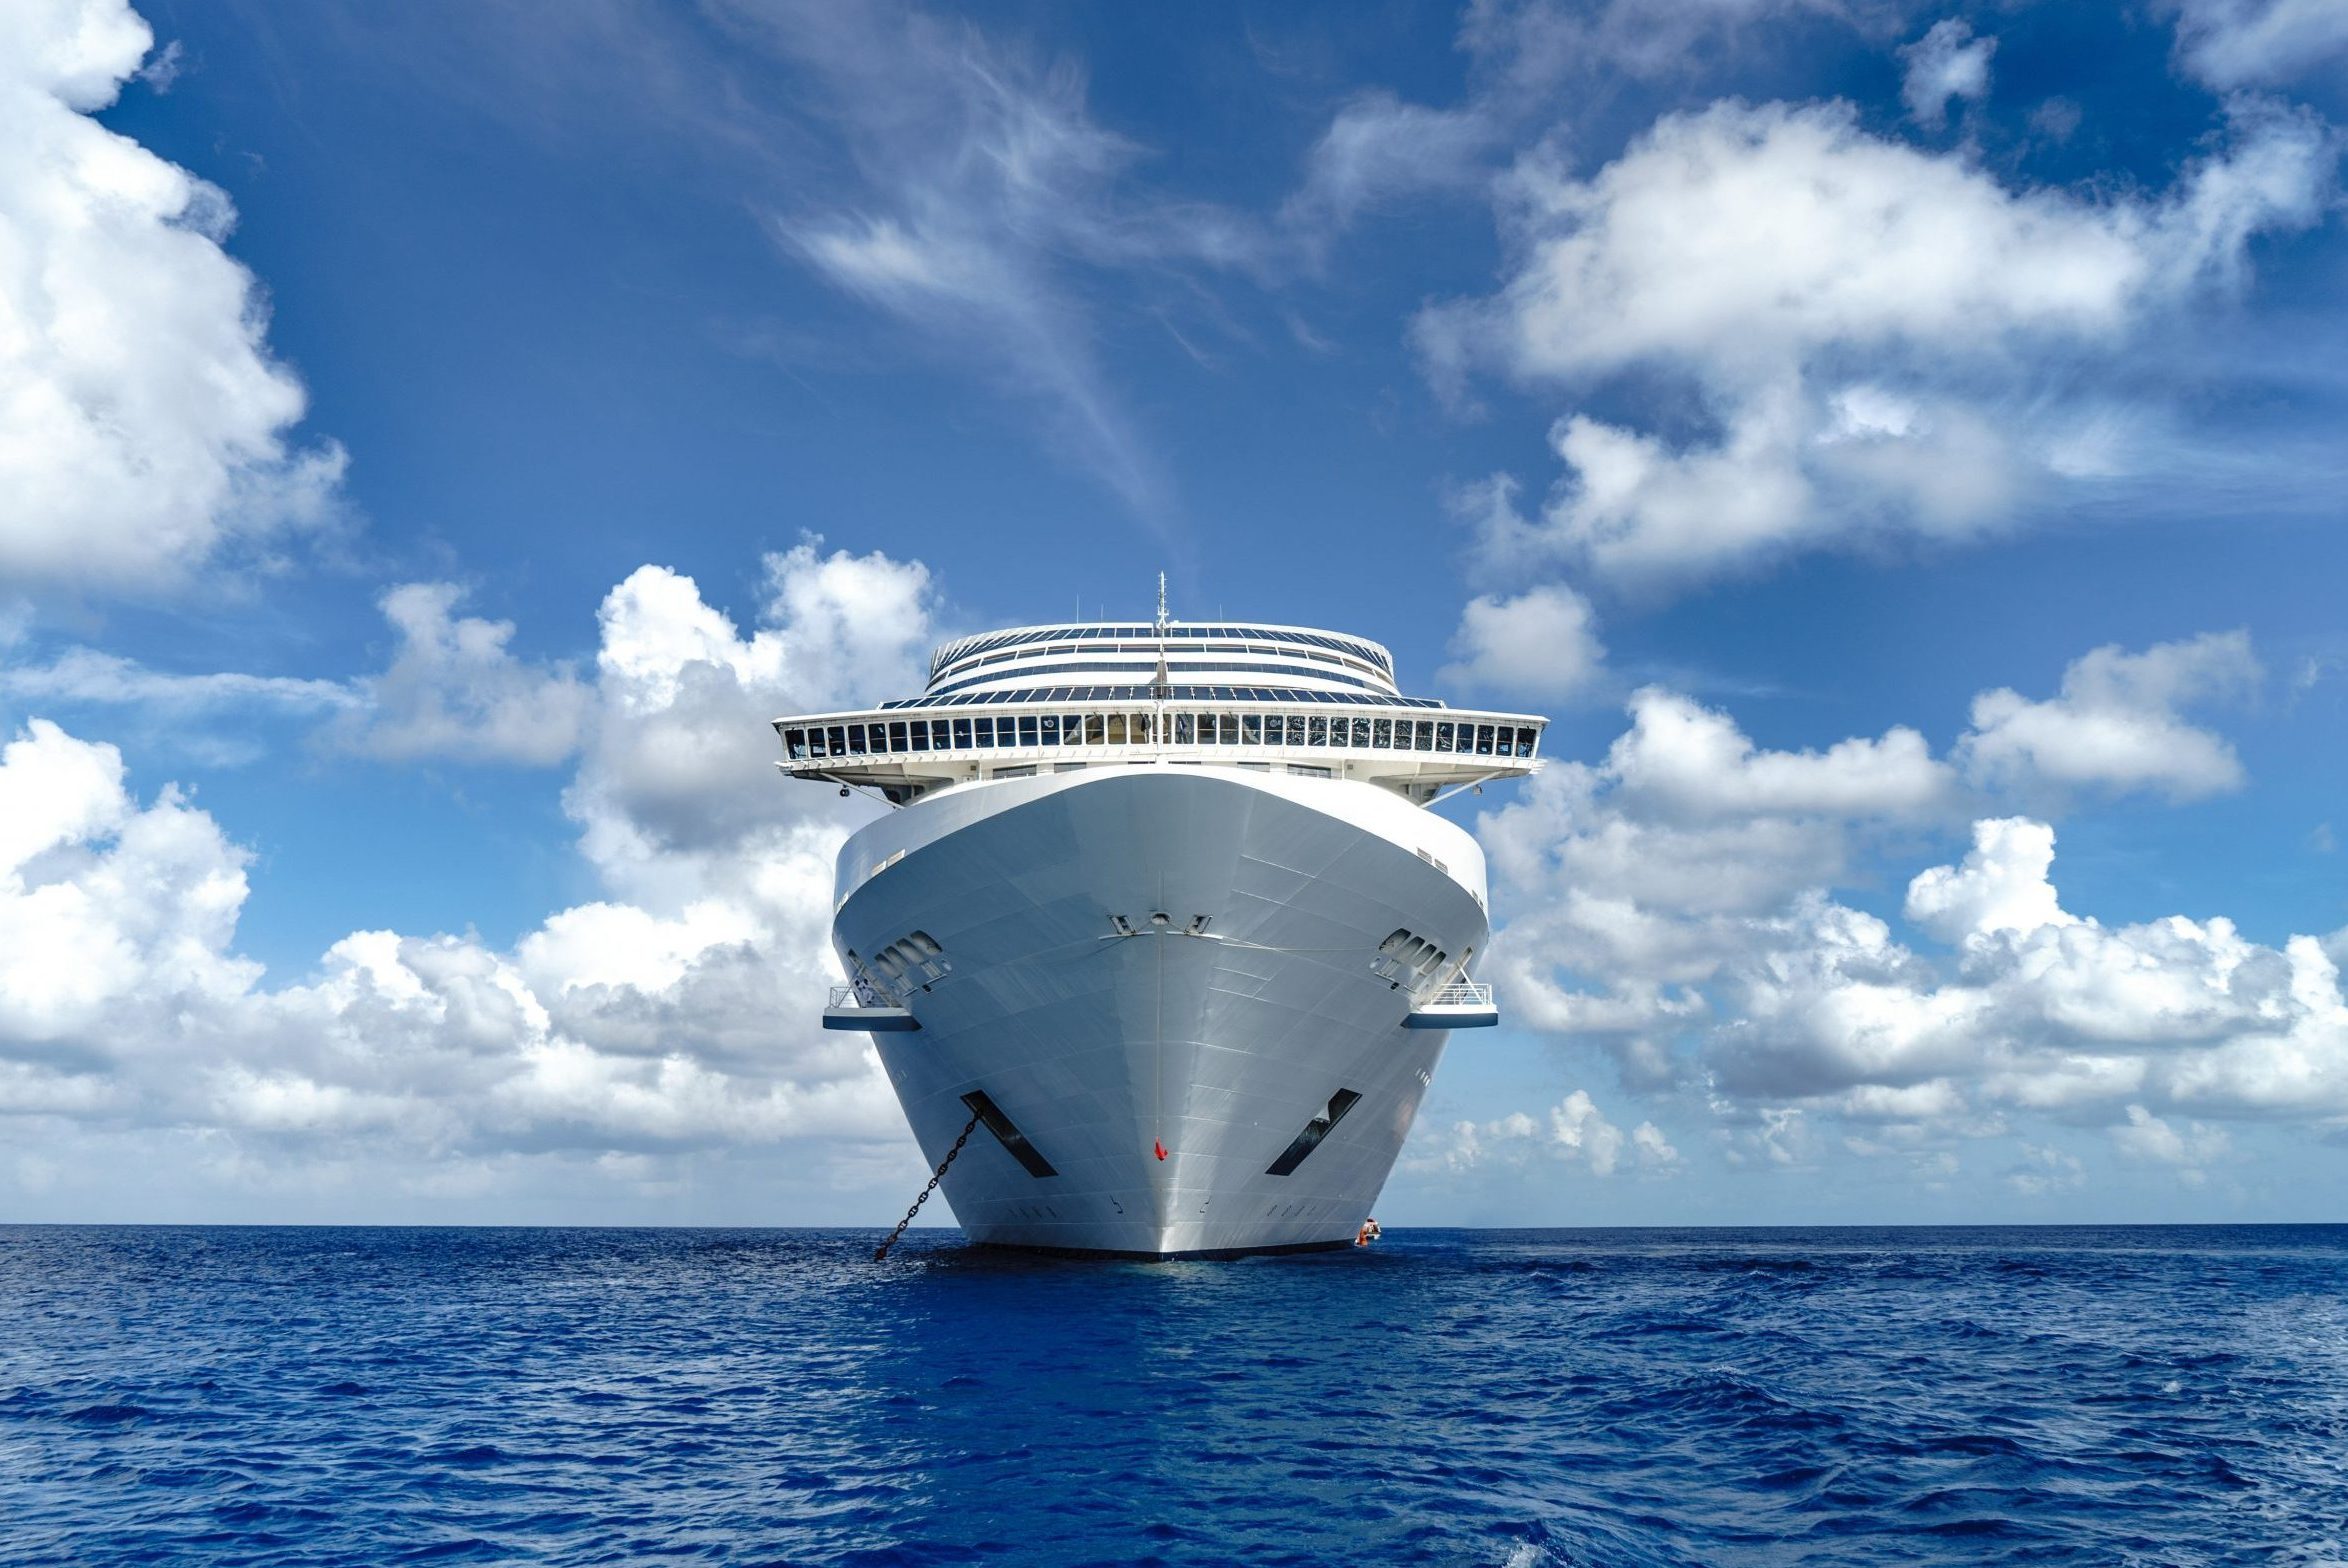 10 Hidden Features on Cruise Ships You'll Want to Know About